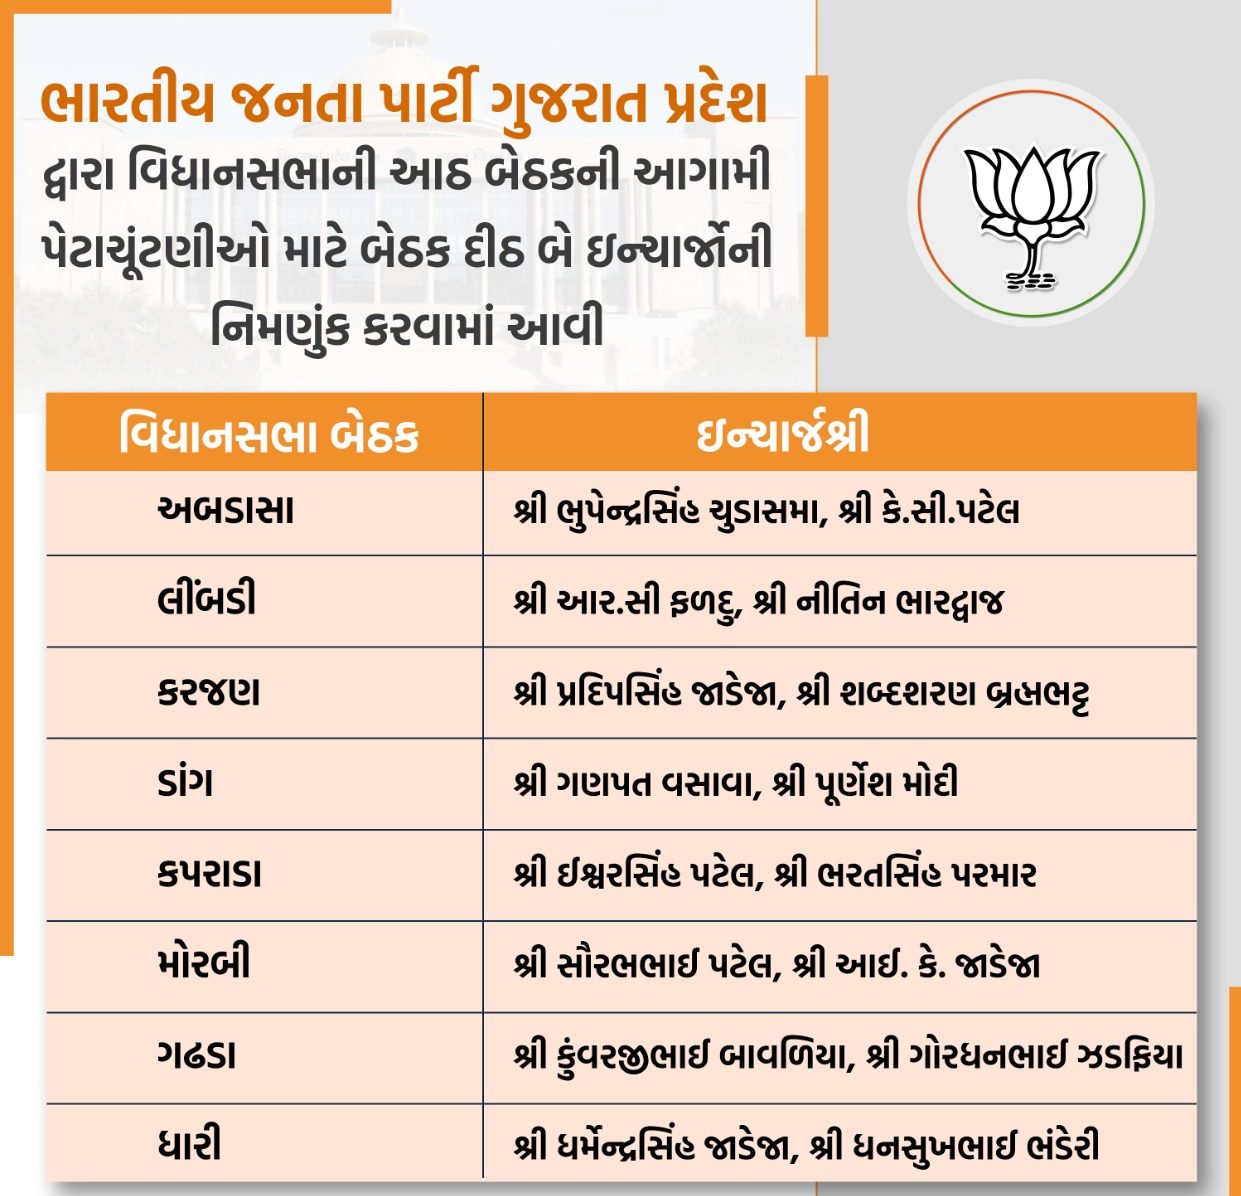 What are the reasons behind the appointment of Incharge in Gujarat BJP?